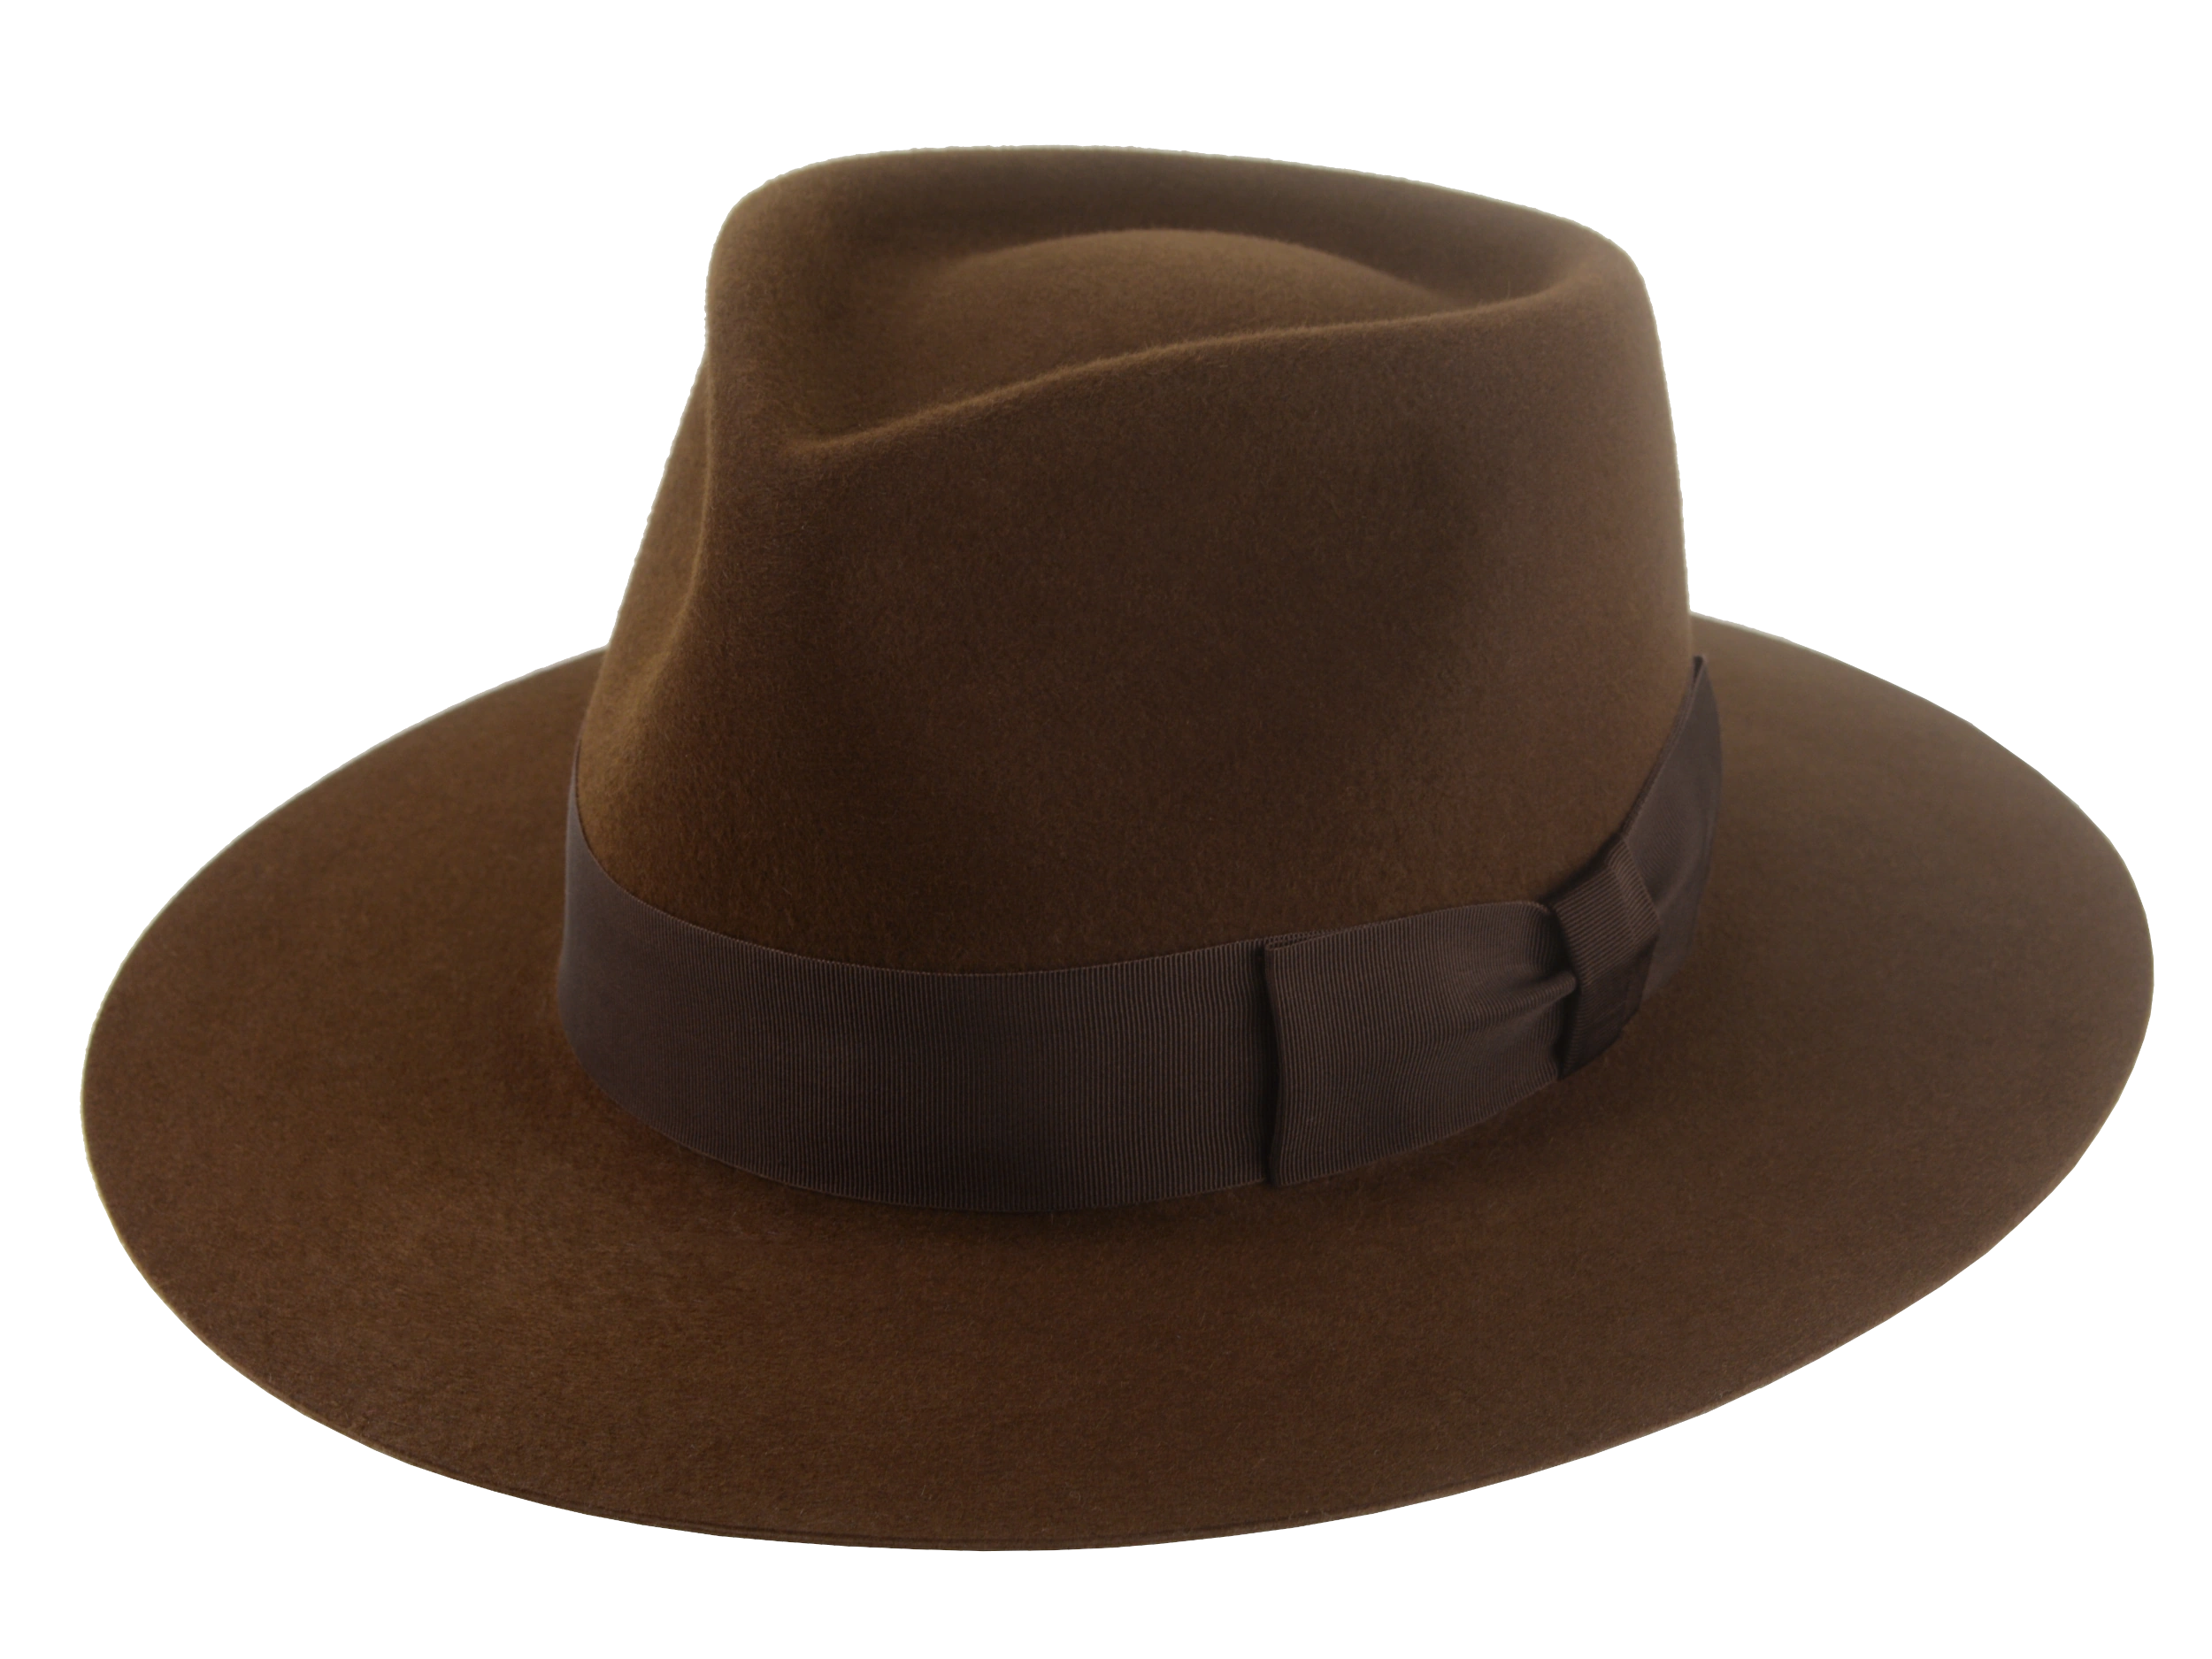 The Discoverer: Frontal view highlighting the hat's overall design and umber brown color | Agnoulita Hats